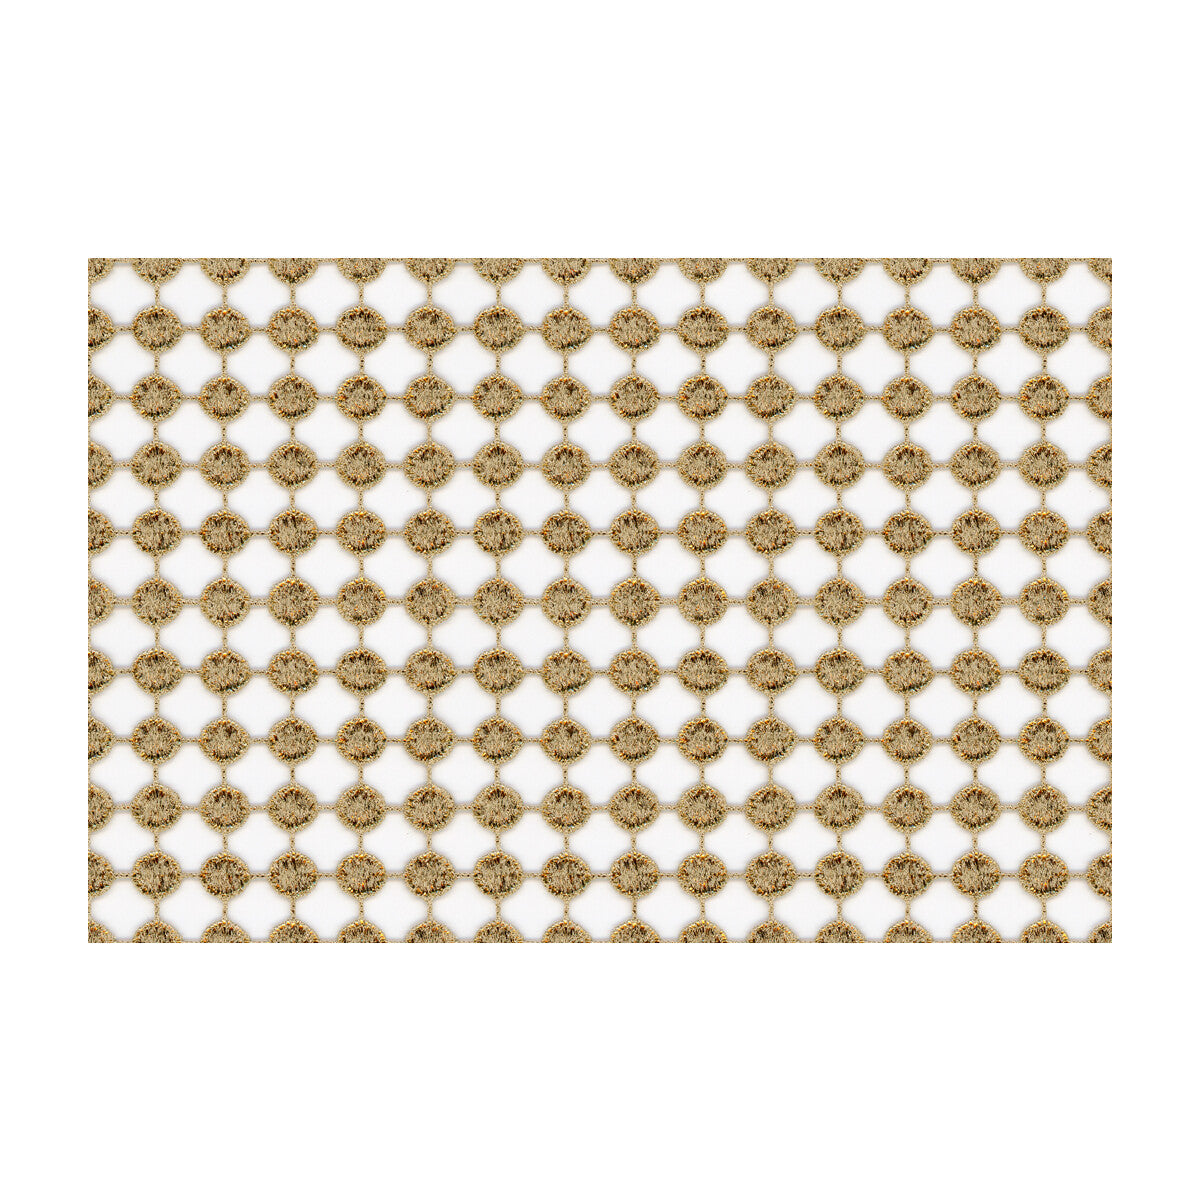 Party Favors fabric in old gold color - pattern 3987.4.0 - by Kravet Couture in the Modern Luxe collection